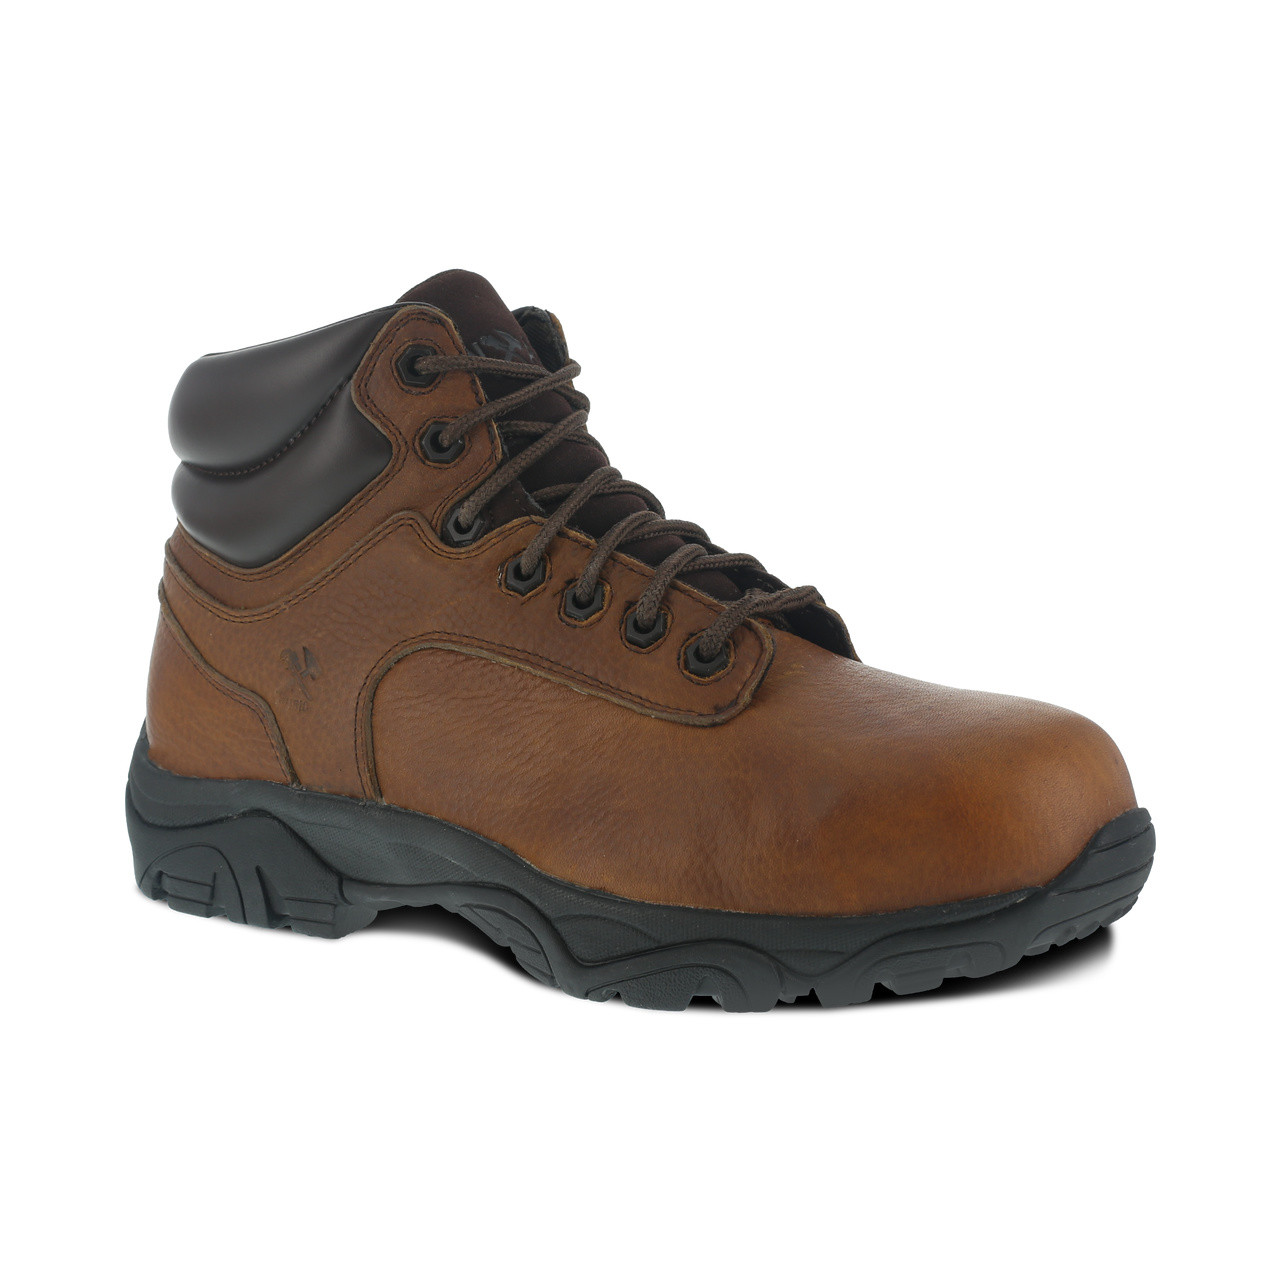 IRON AGE TRENCHER BROWN 6" WORK BOOT COMP TOE BOOTS IA5002